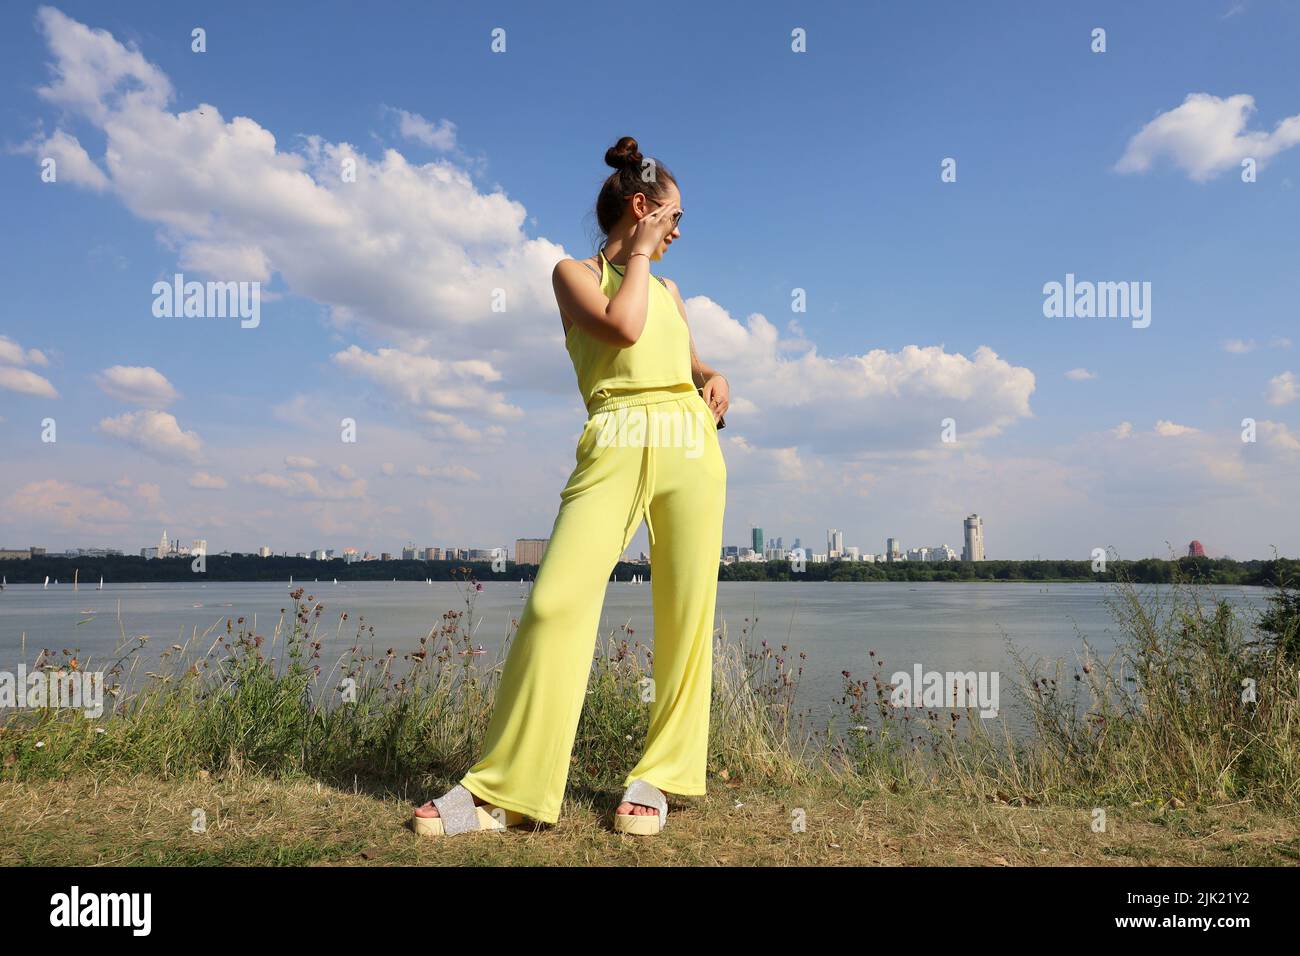 Happy slim girl in sunglasses and yellow summer suit standing on a beach on background of city buildings. Females fashion and beauty Stock Photo